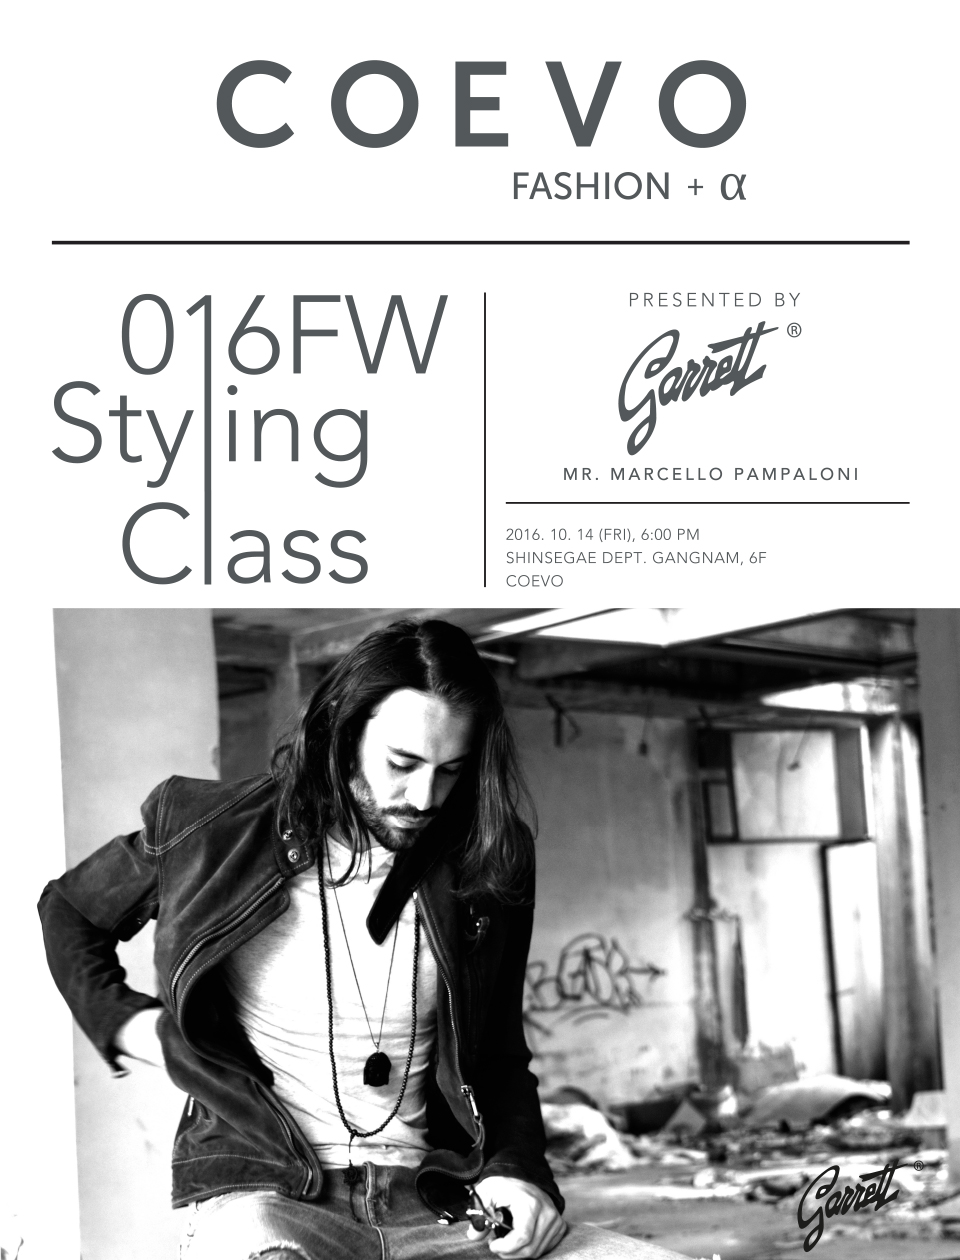 2016 FW STYLING CLASS